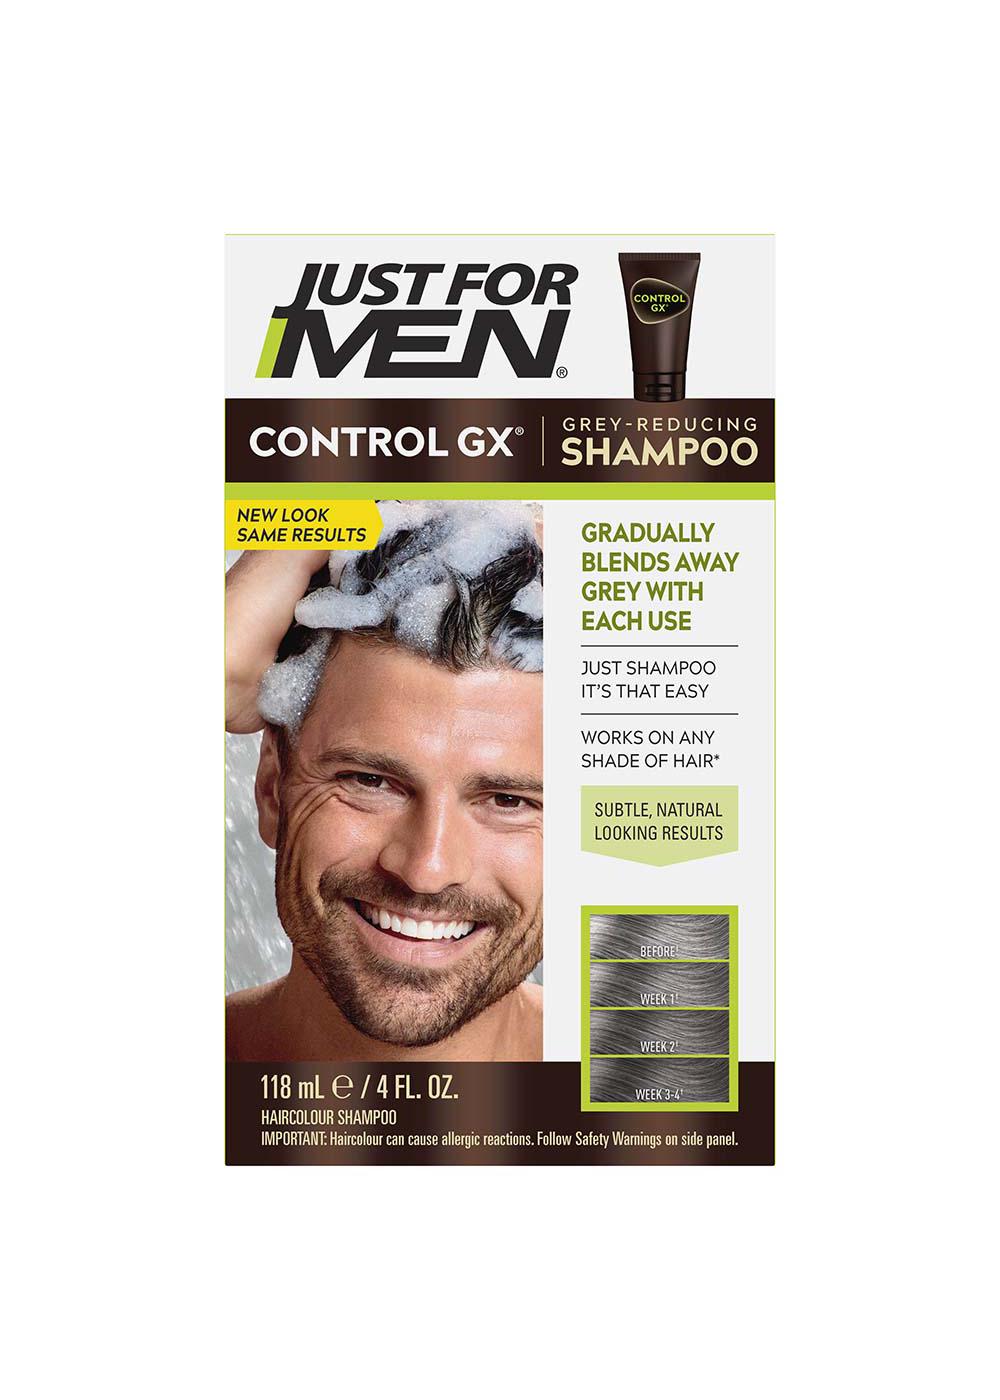 Just For Men Control GX Gray Reducing Shampoo; image 1 of 6